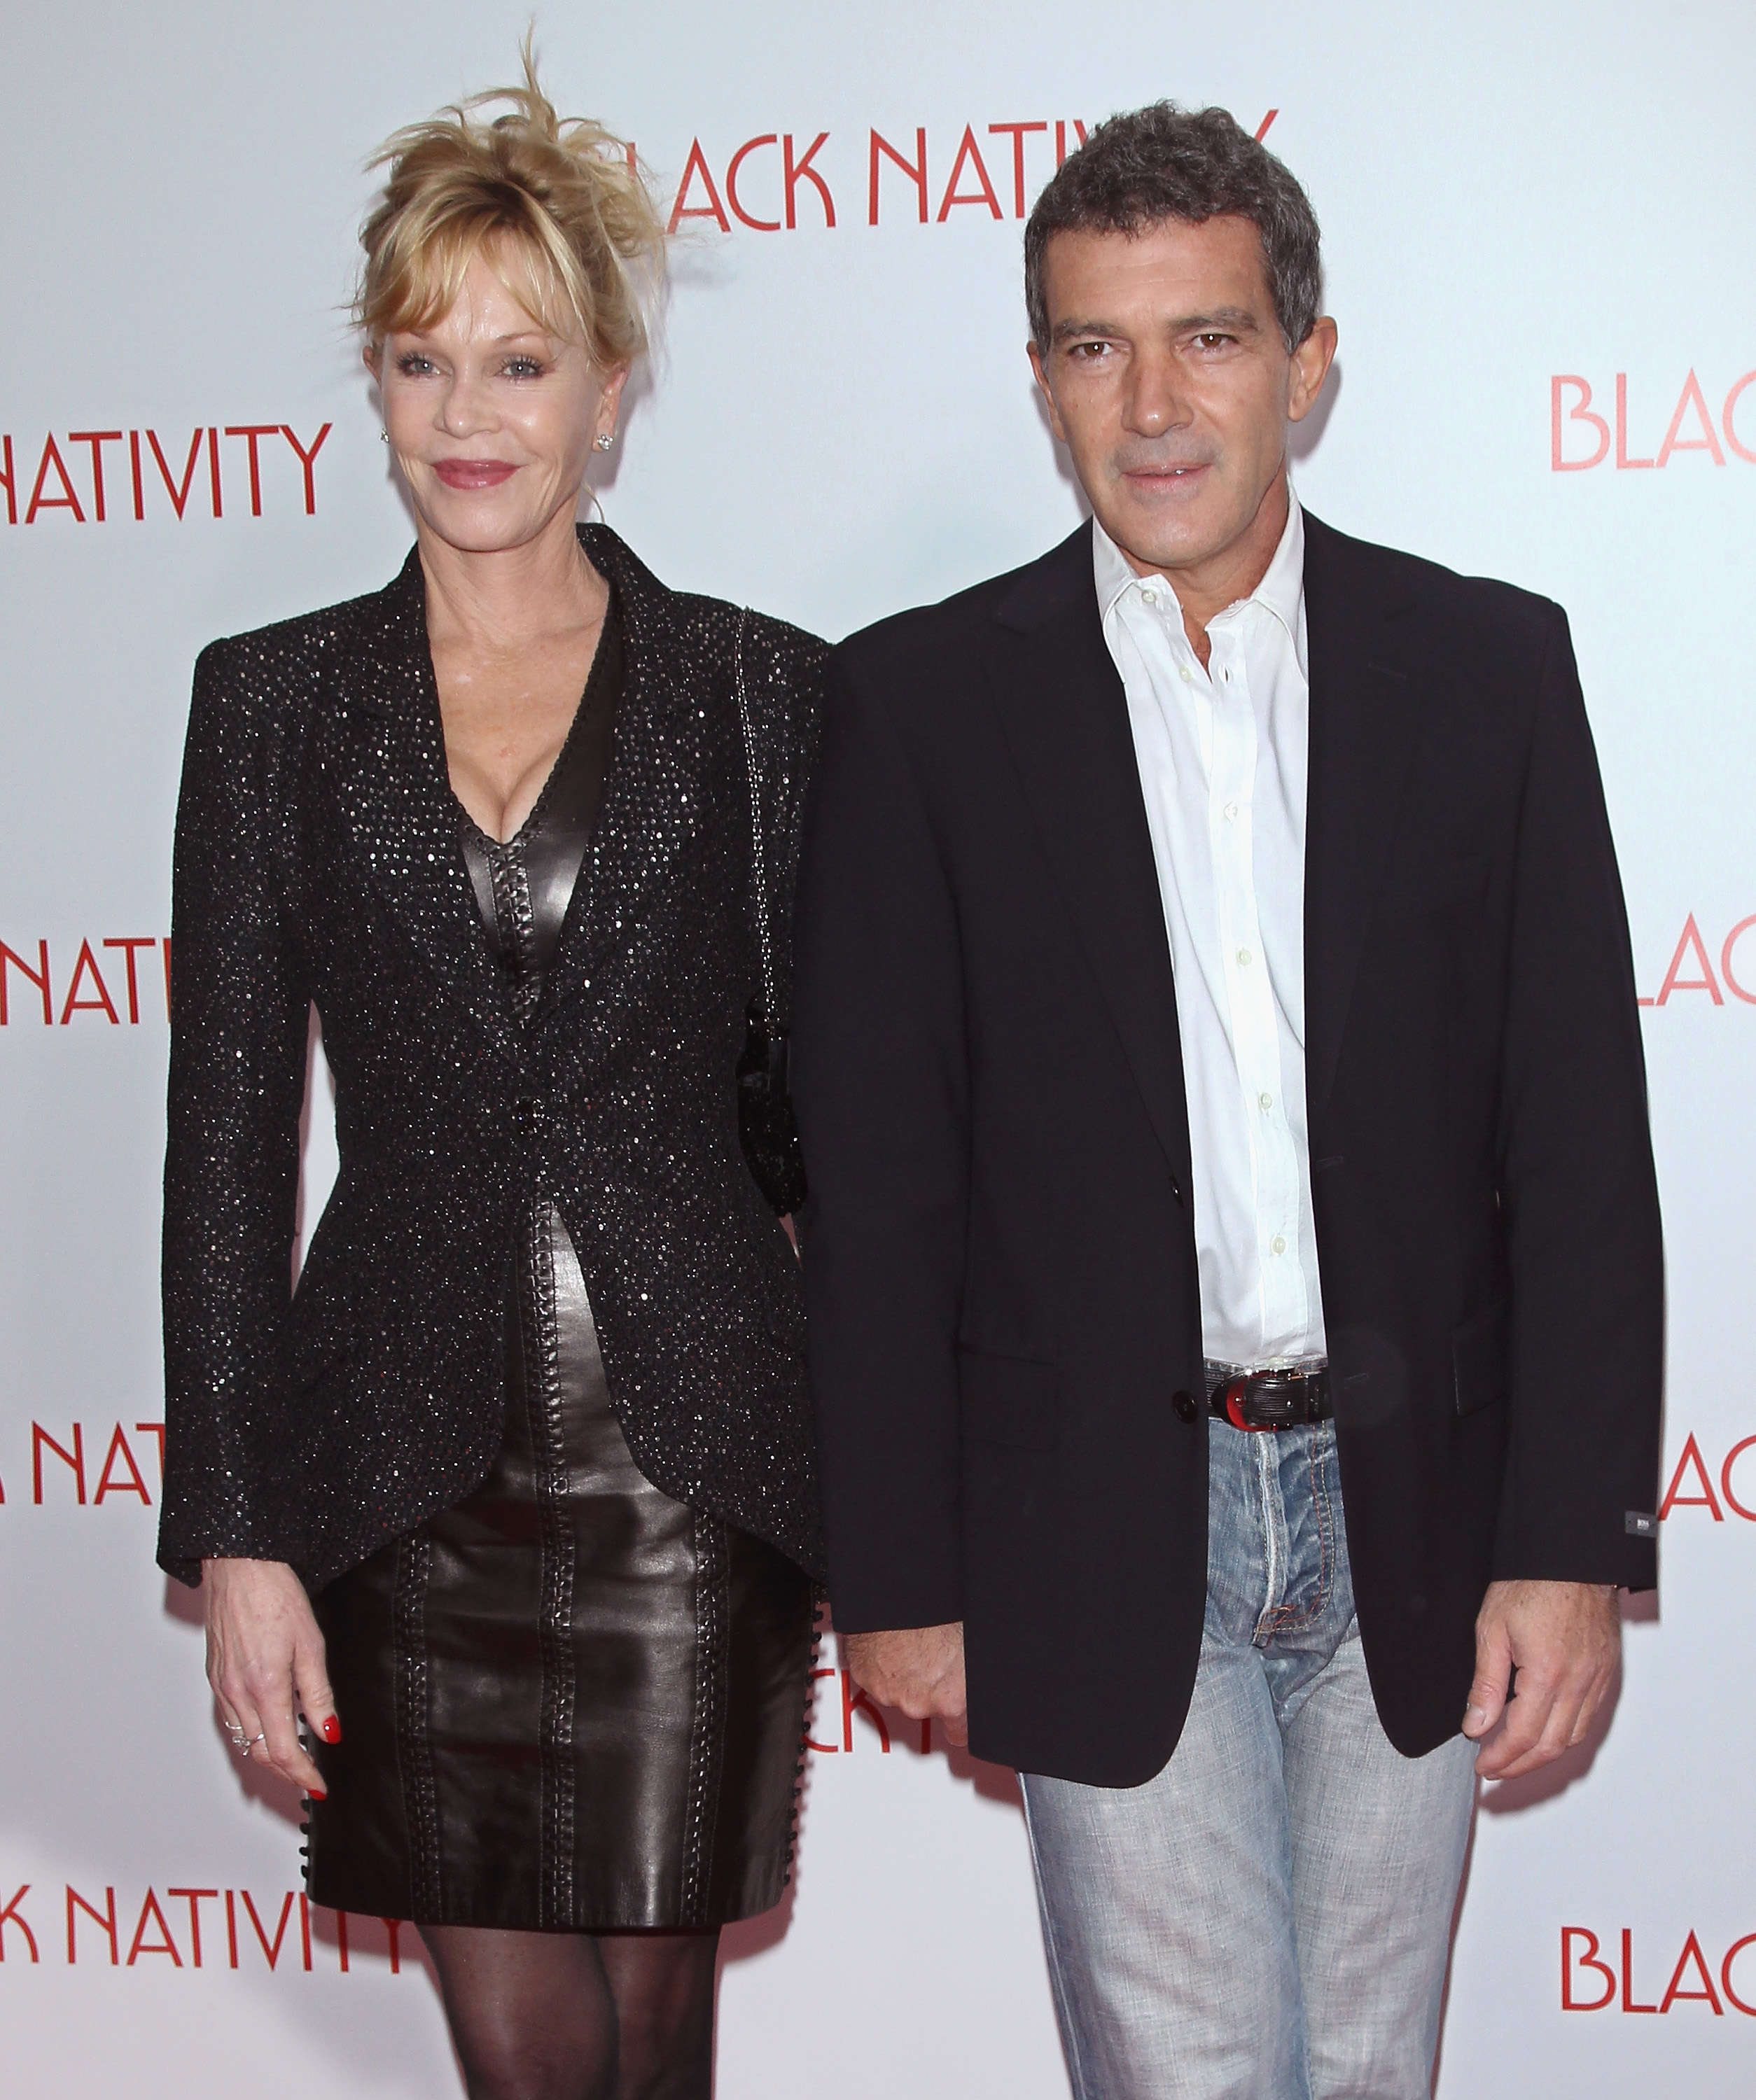 Melanie Griffith and Antonio Banderas in New York in 2013 | Source: Getty Images